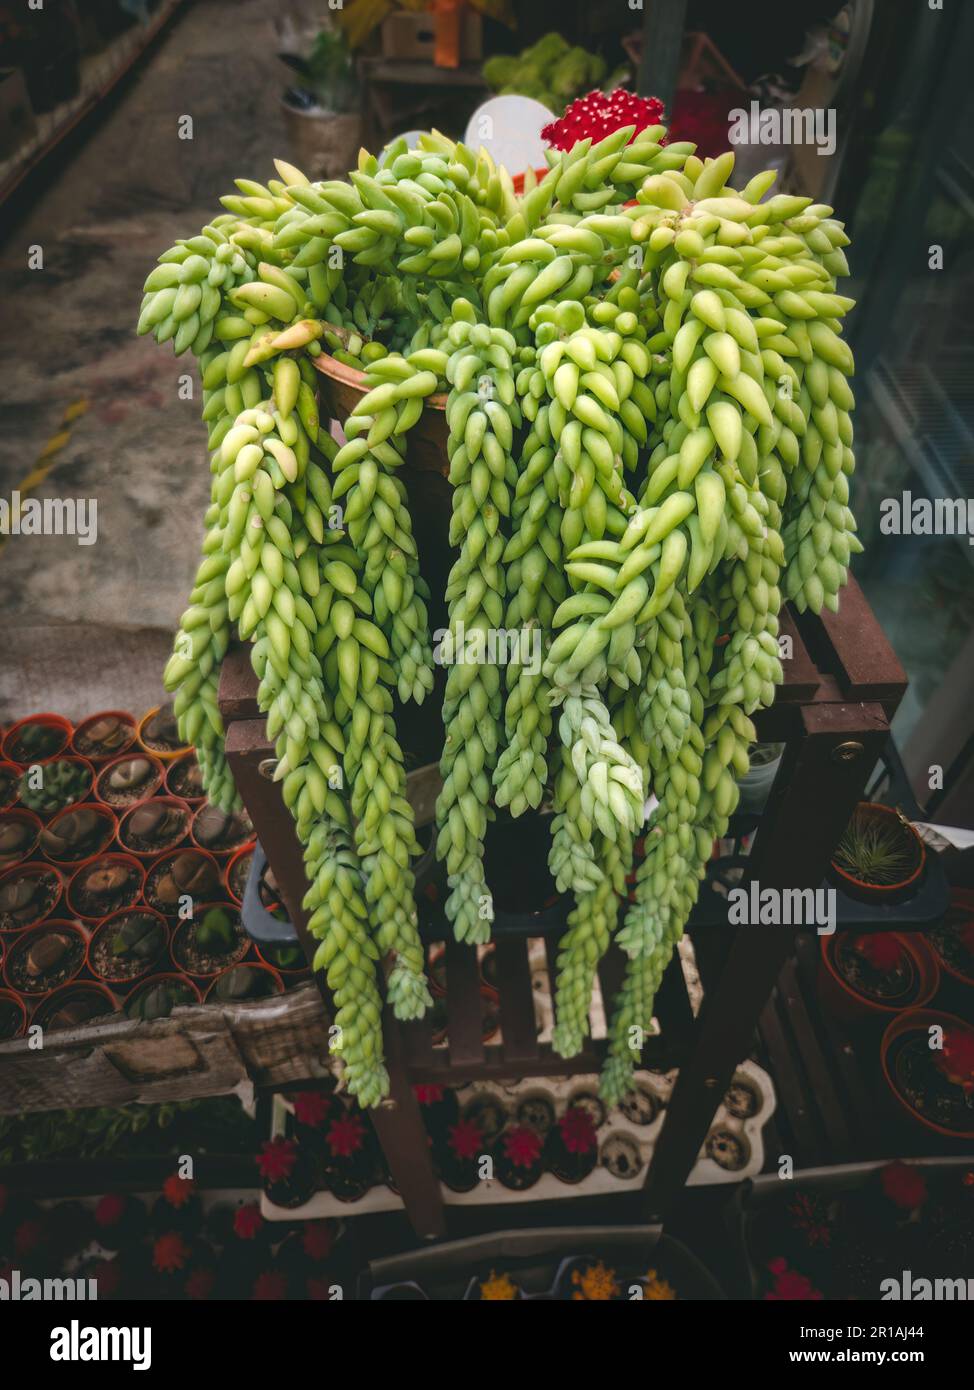 A close-up shot of a striking donkey tail plant in a vibrant green hue, displayed in a plant shop Stock Photo